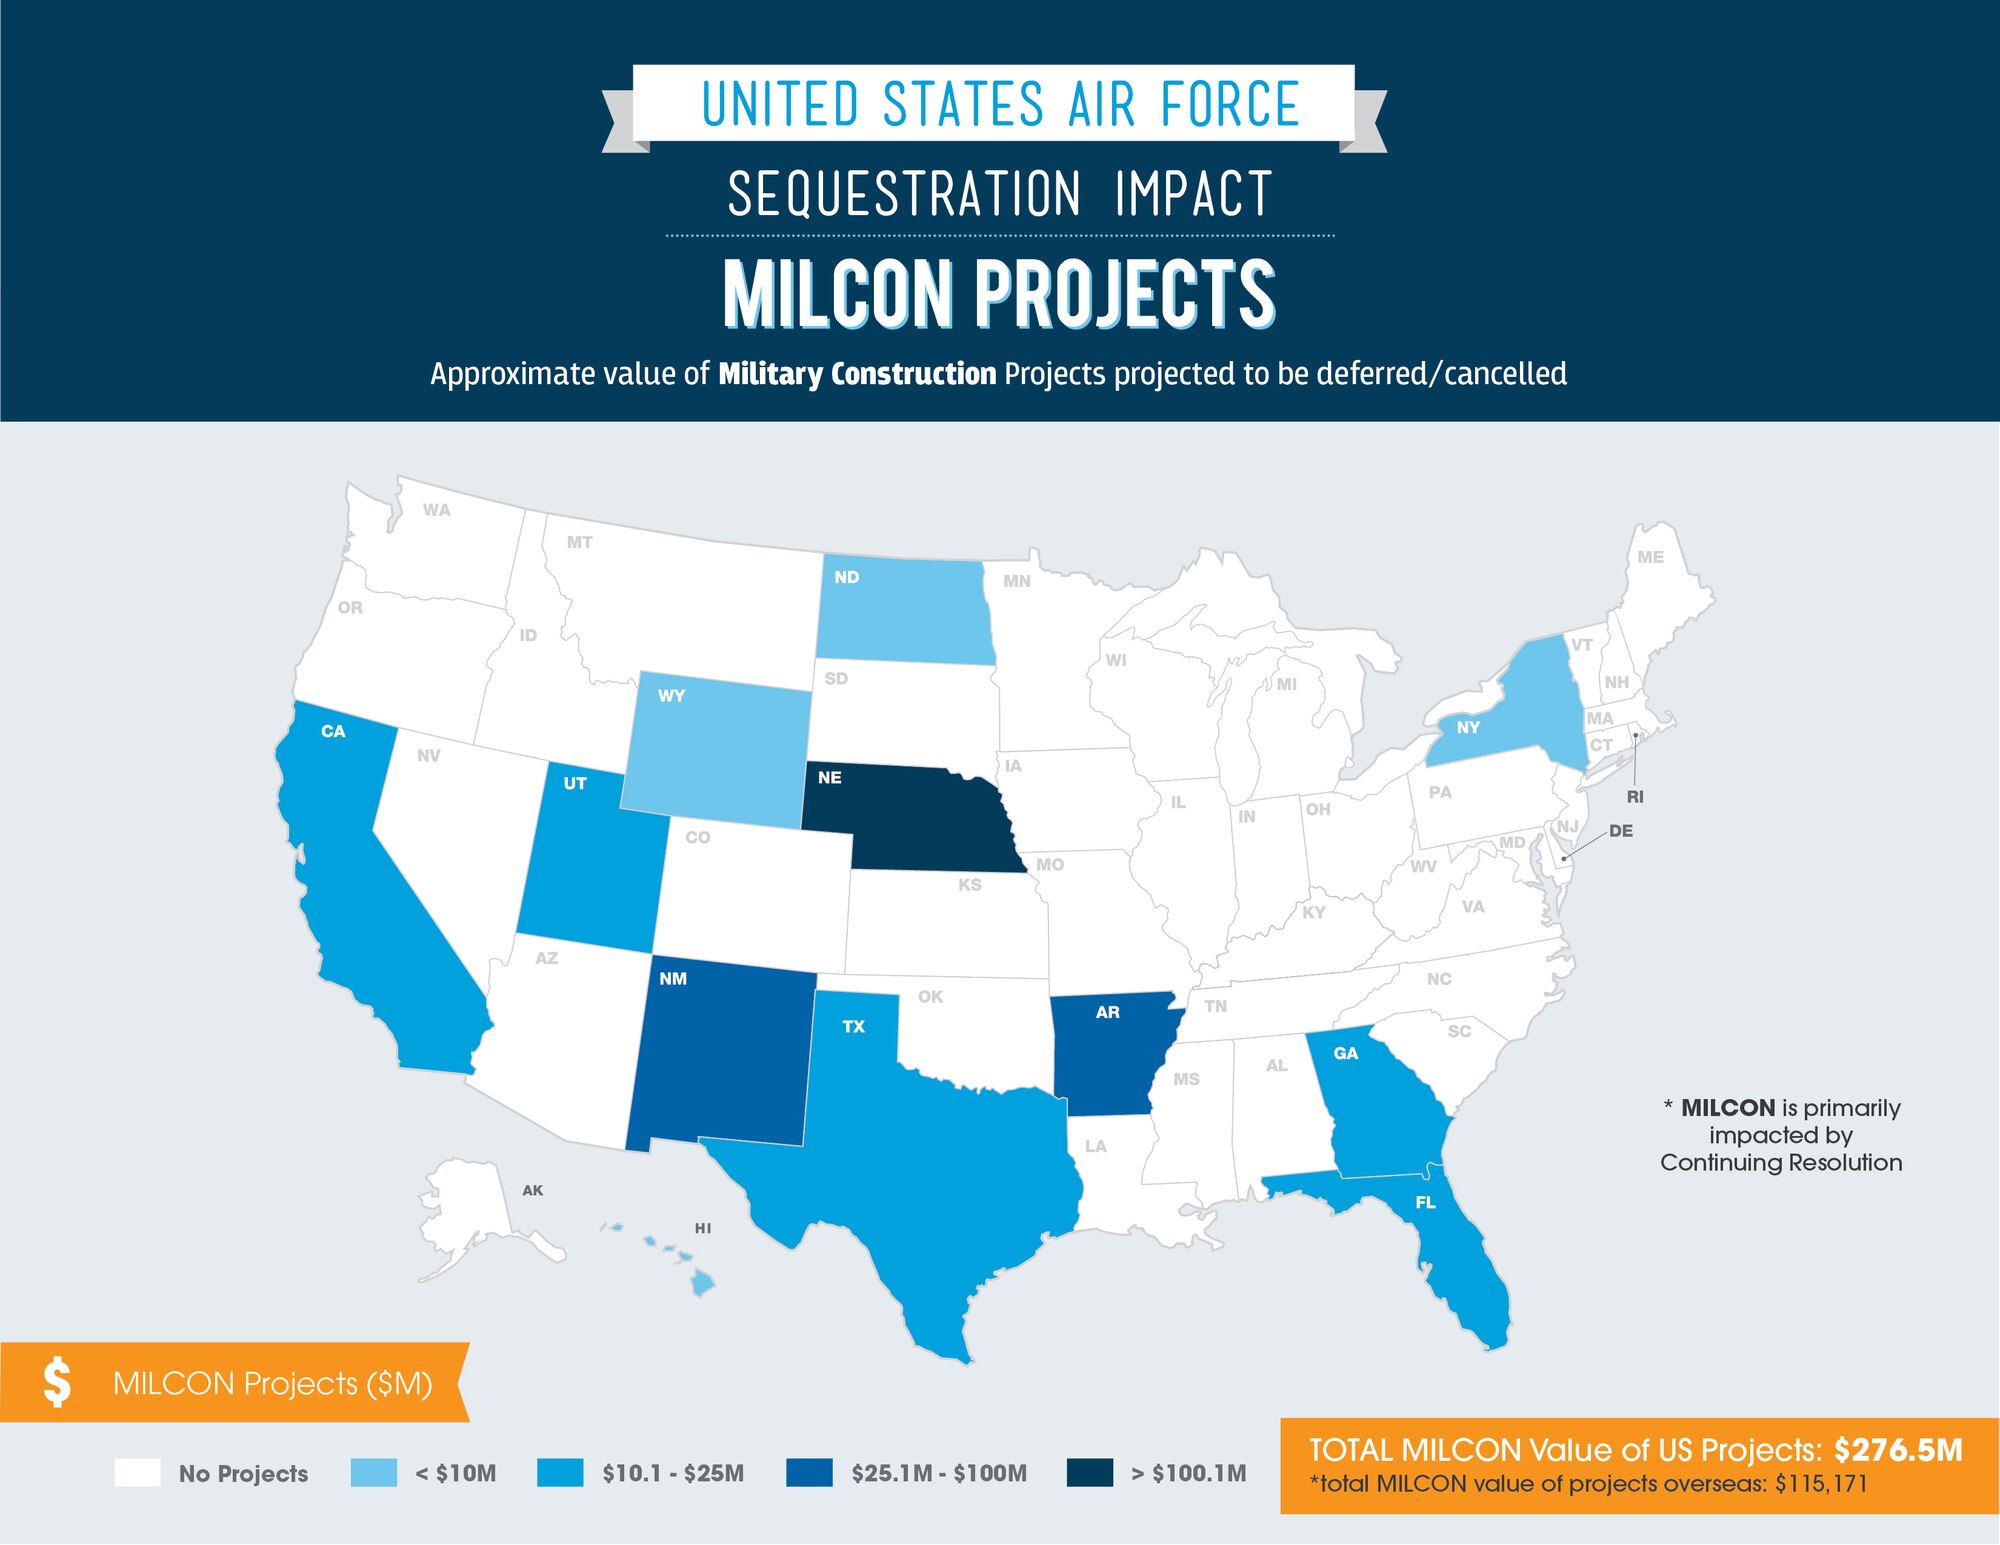 MILCON projects: approximate value of military construction projects projected to be deferred/cancelled. (U.S. Air Force graphic)